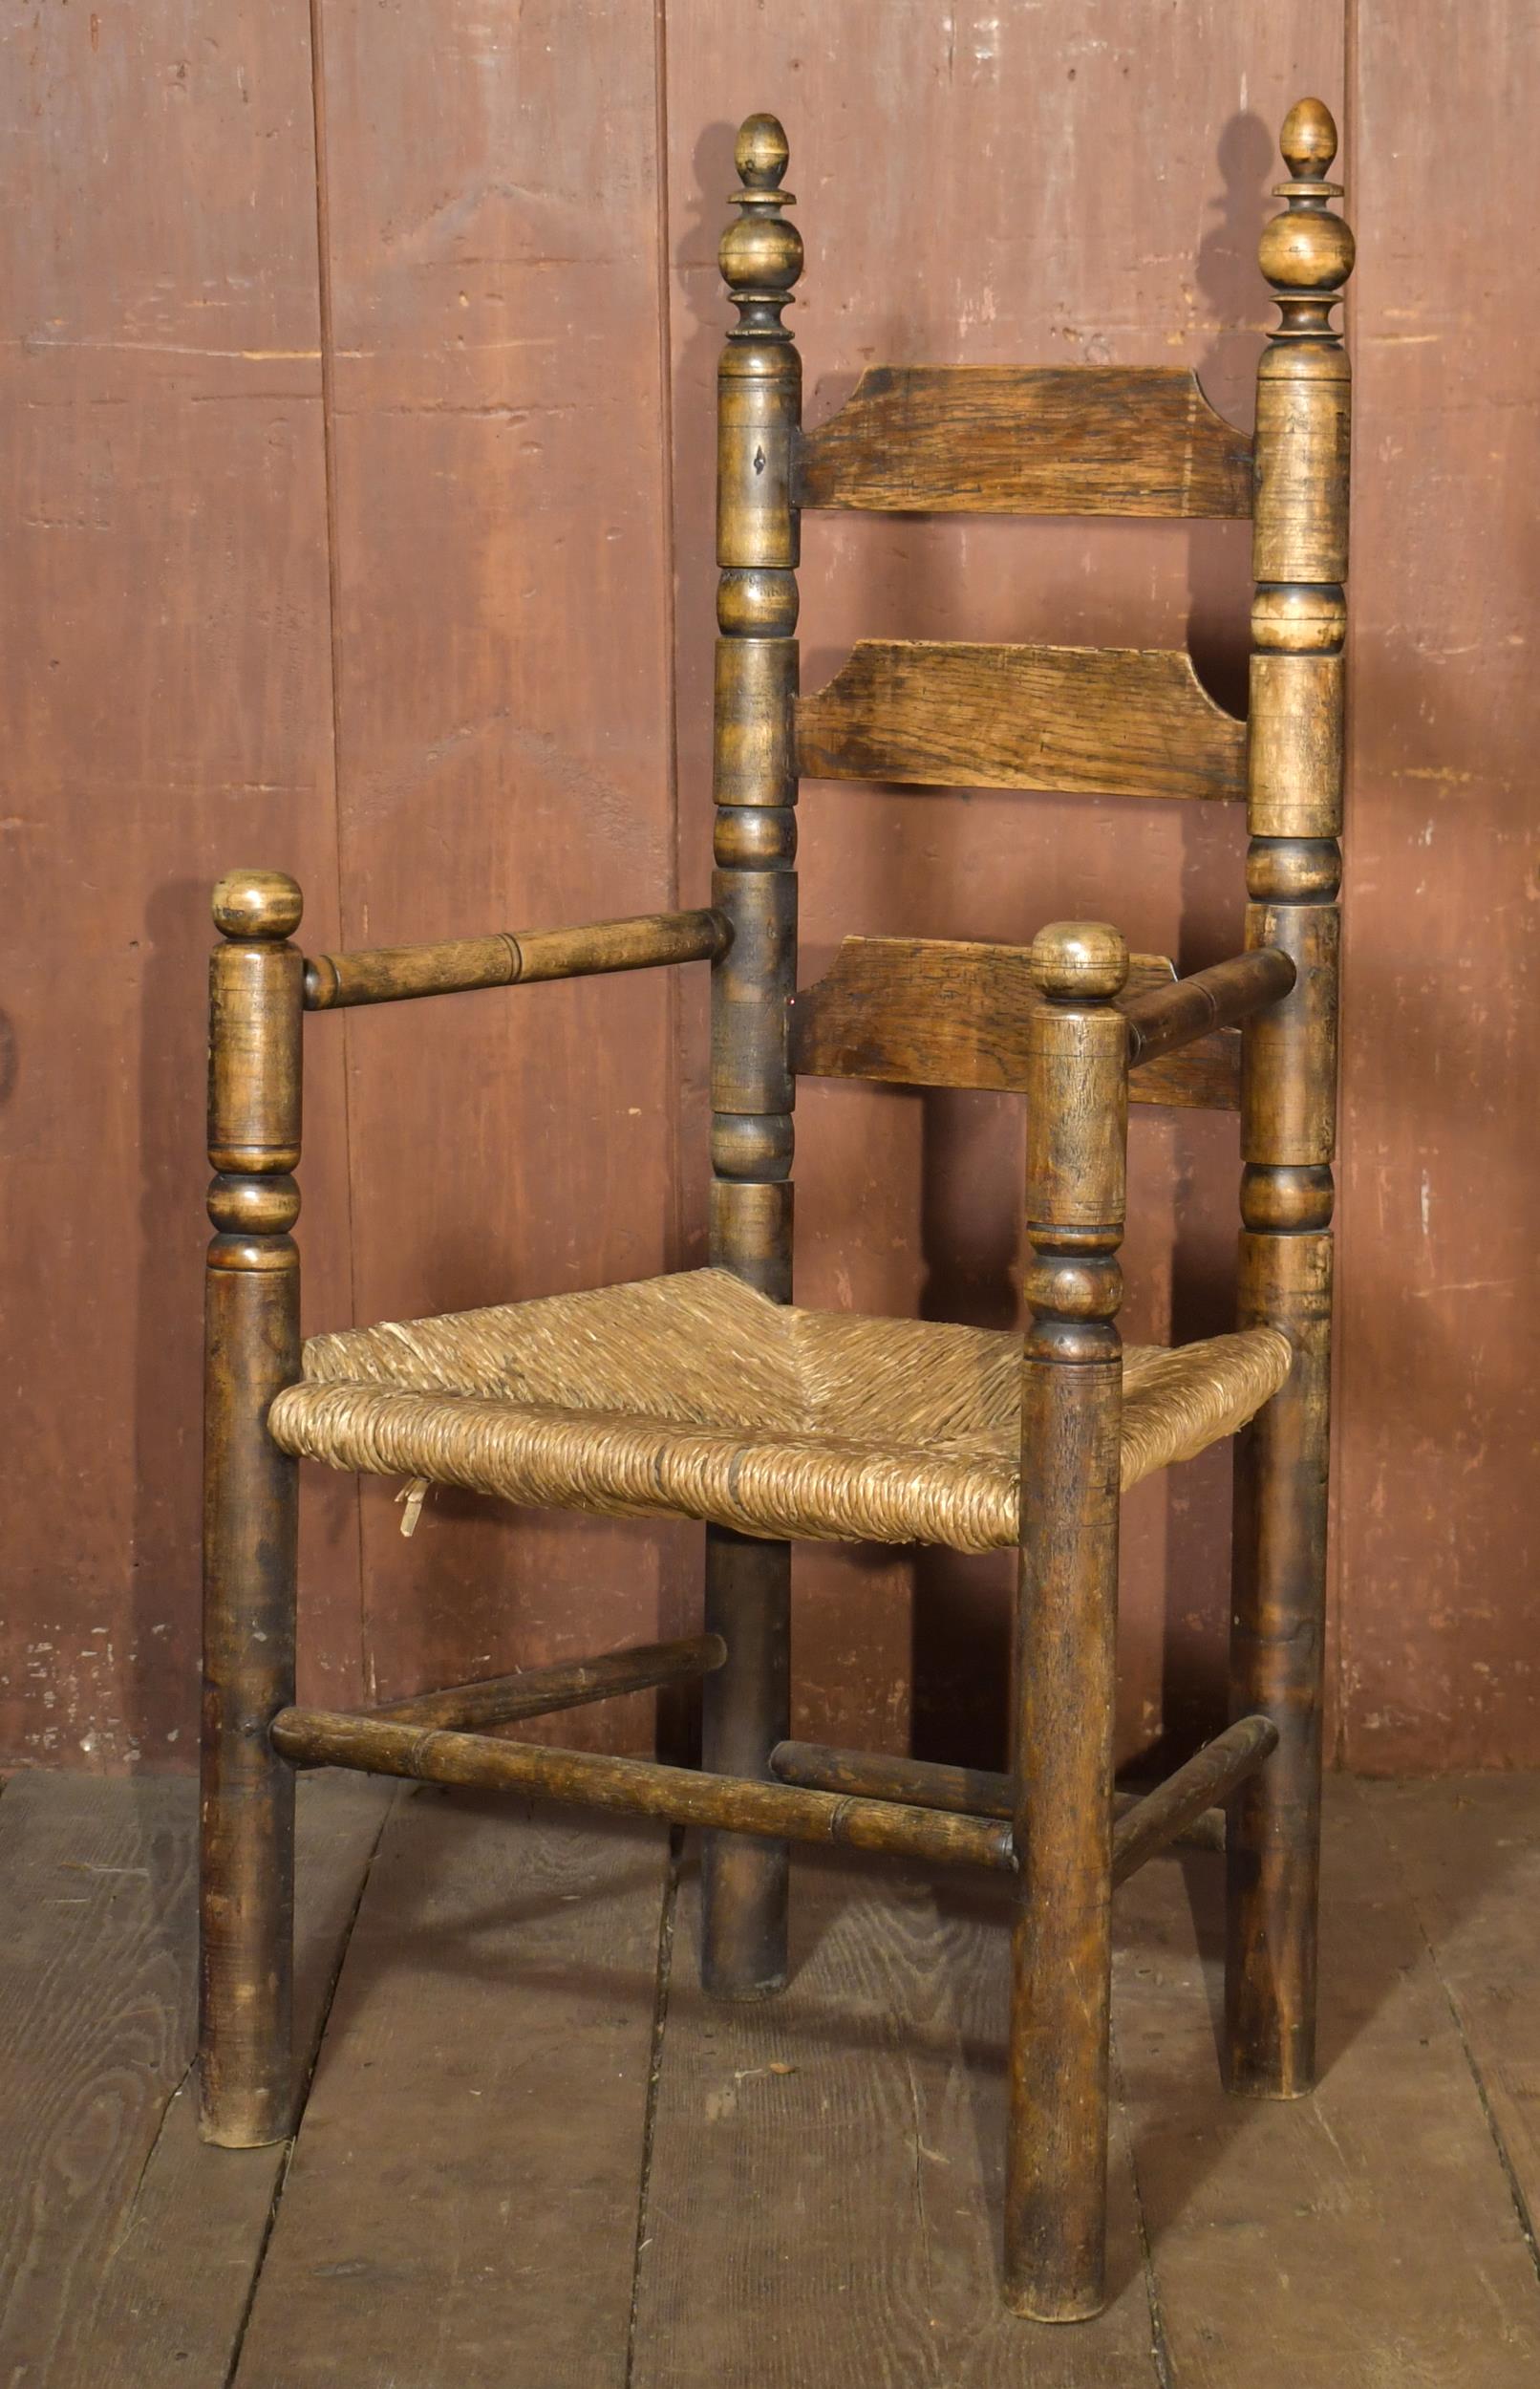 EARLY AMERICAN LADDER BACK CHAIR.